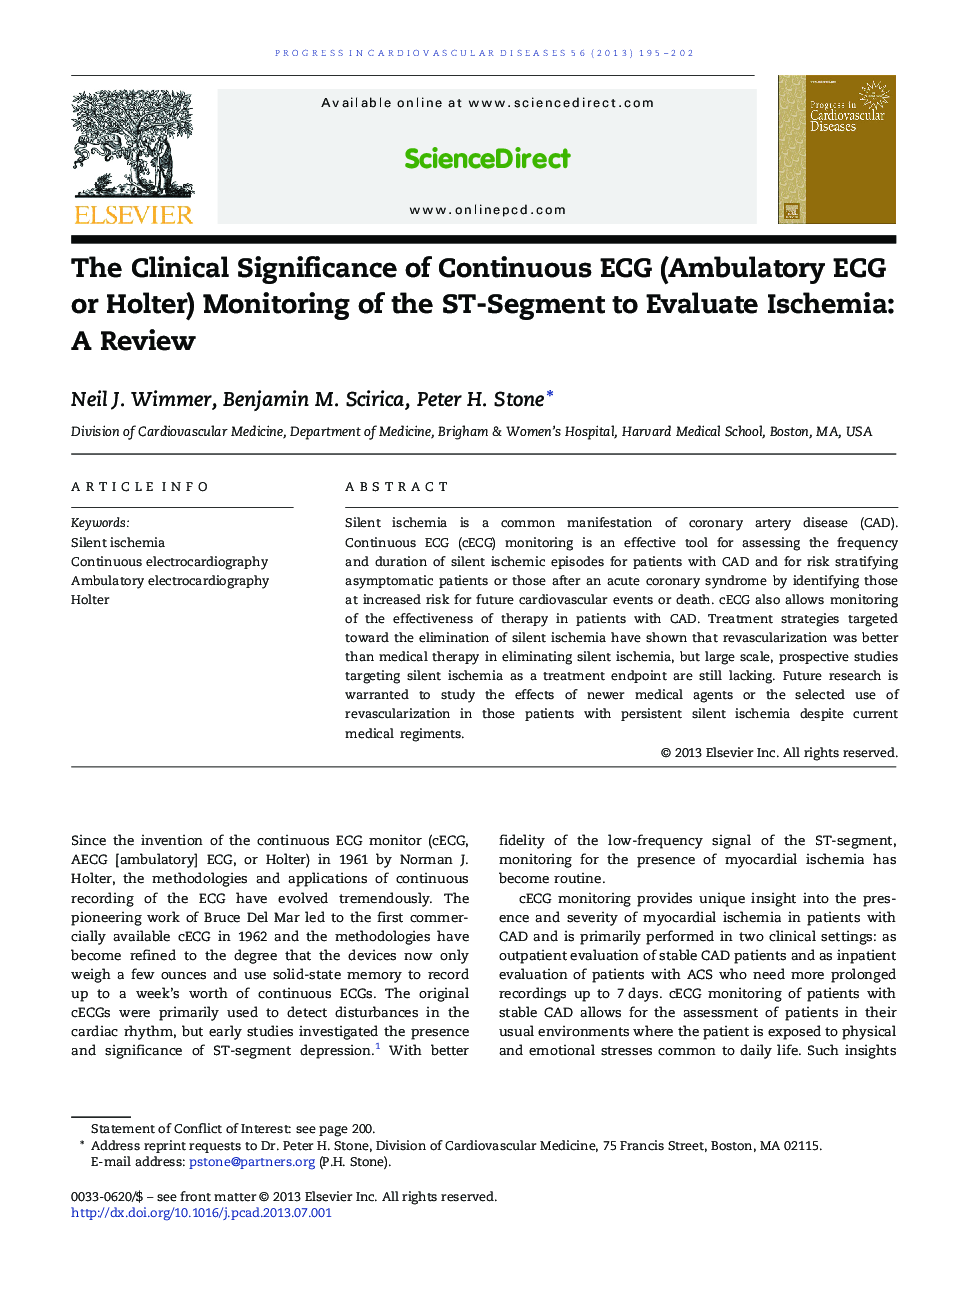 The Clinical Significance of Continuous ECG (Ambulatory ECG or Holter) Monitoring of the ST-Segment to Evaluate Ischemia: A Review 